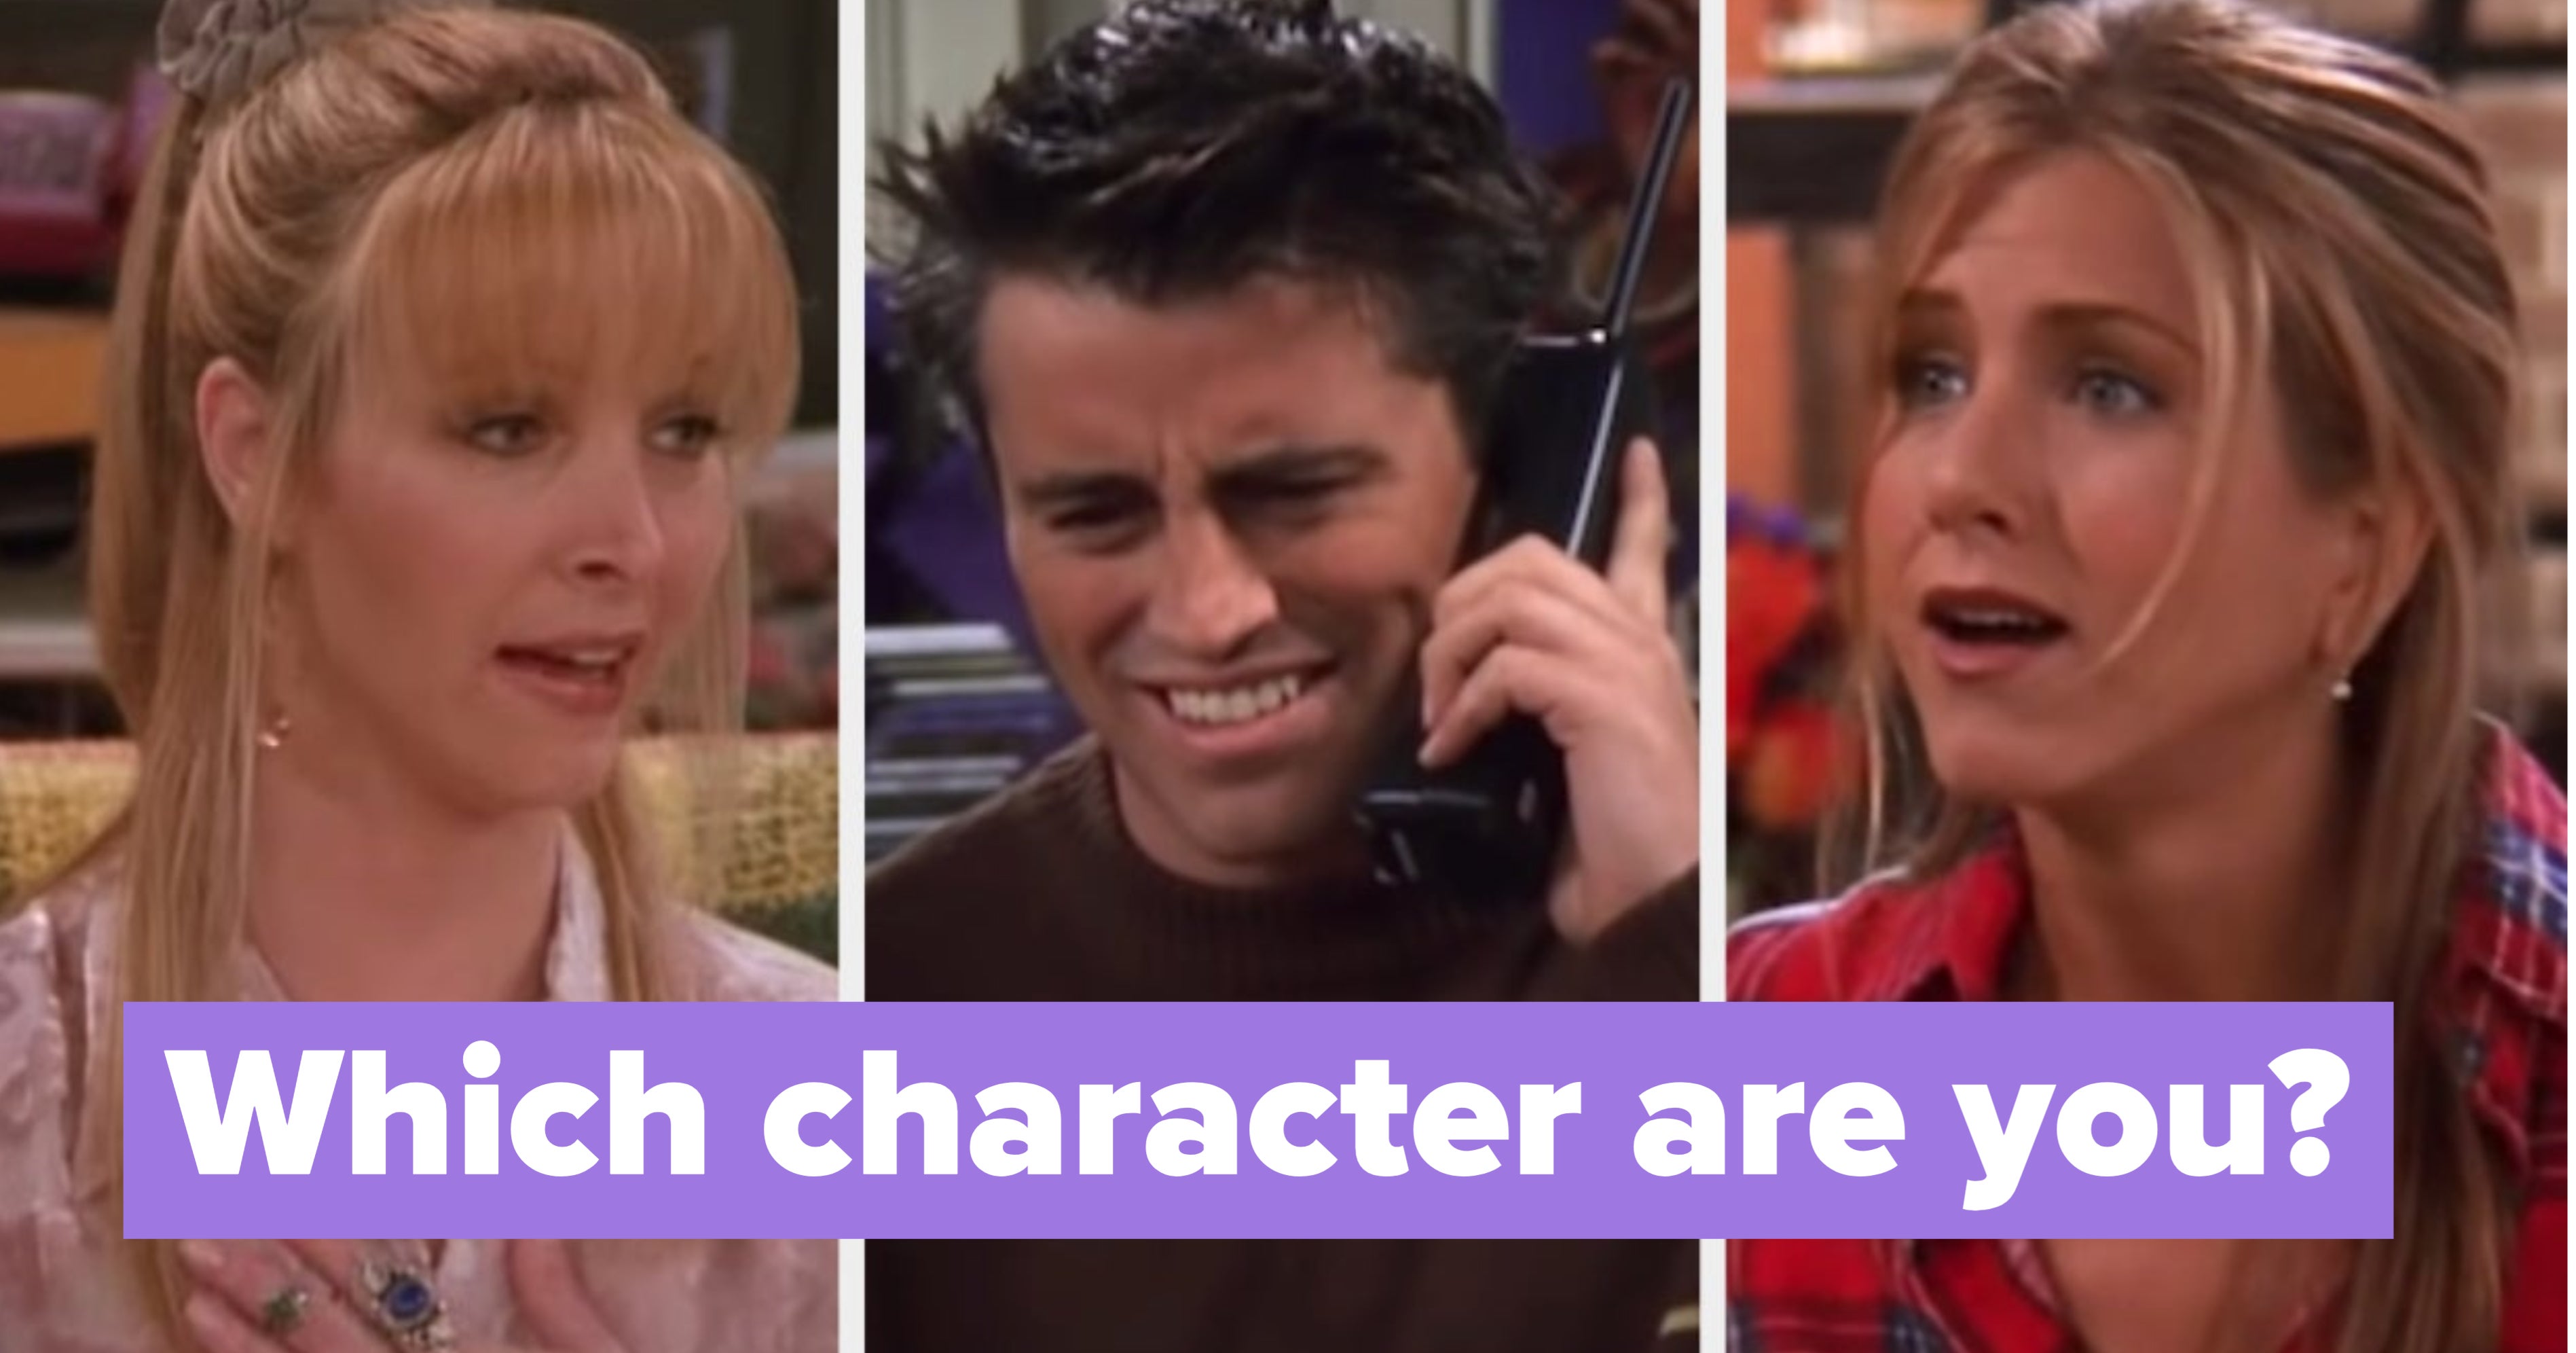 Which Friends Character Are You Based On Your Pizza Preferences?